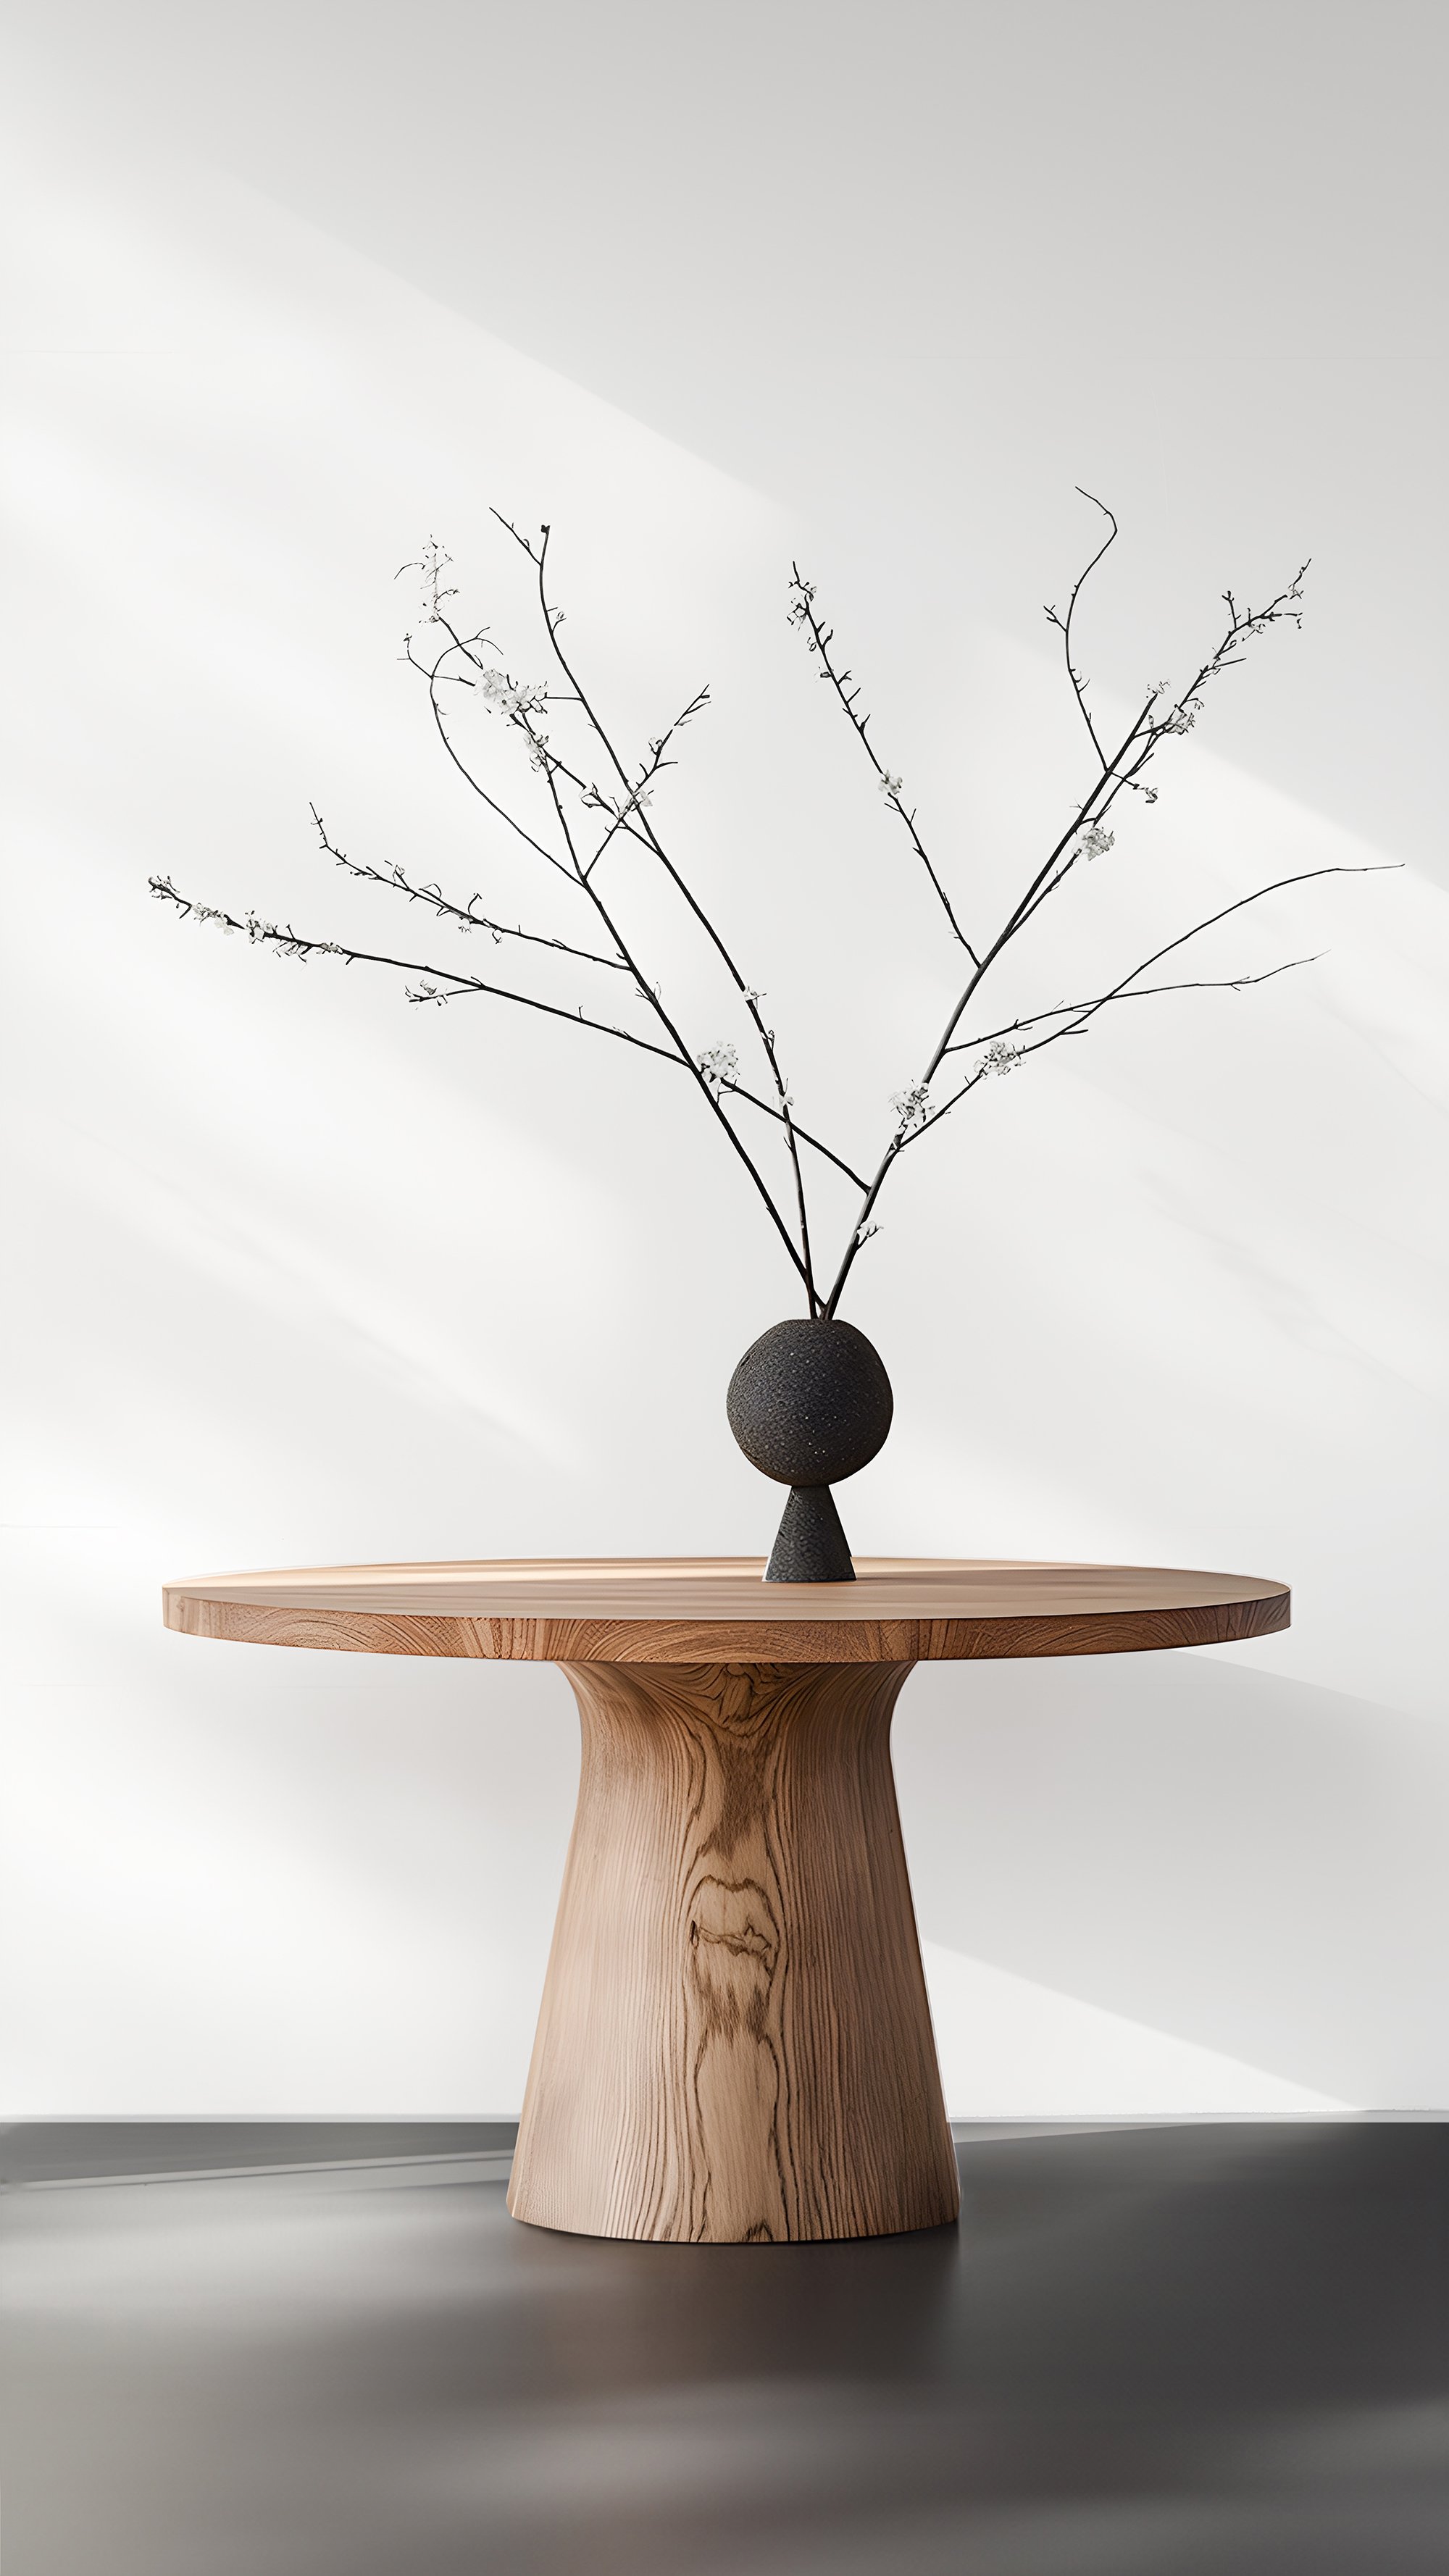 NONO's Socle Series No03, Cocktail Tables with a Wooden Twist - 8.jpg